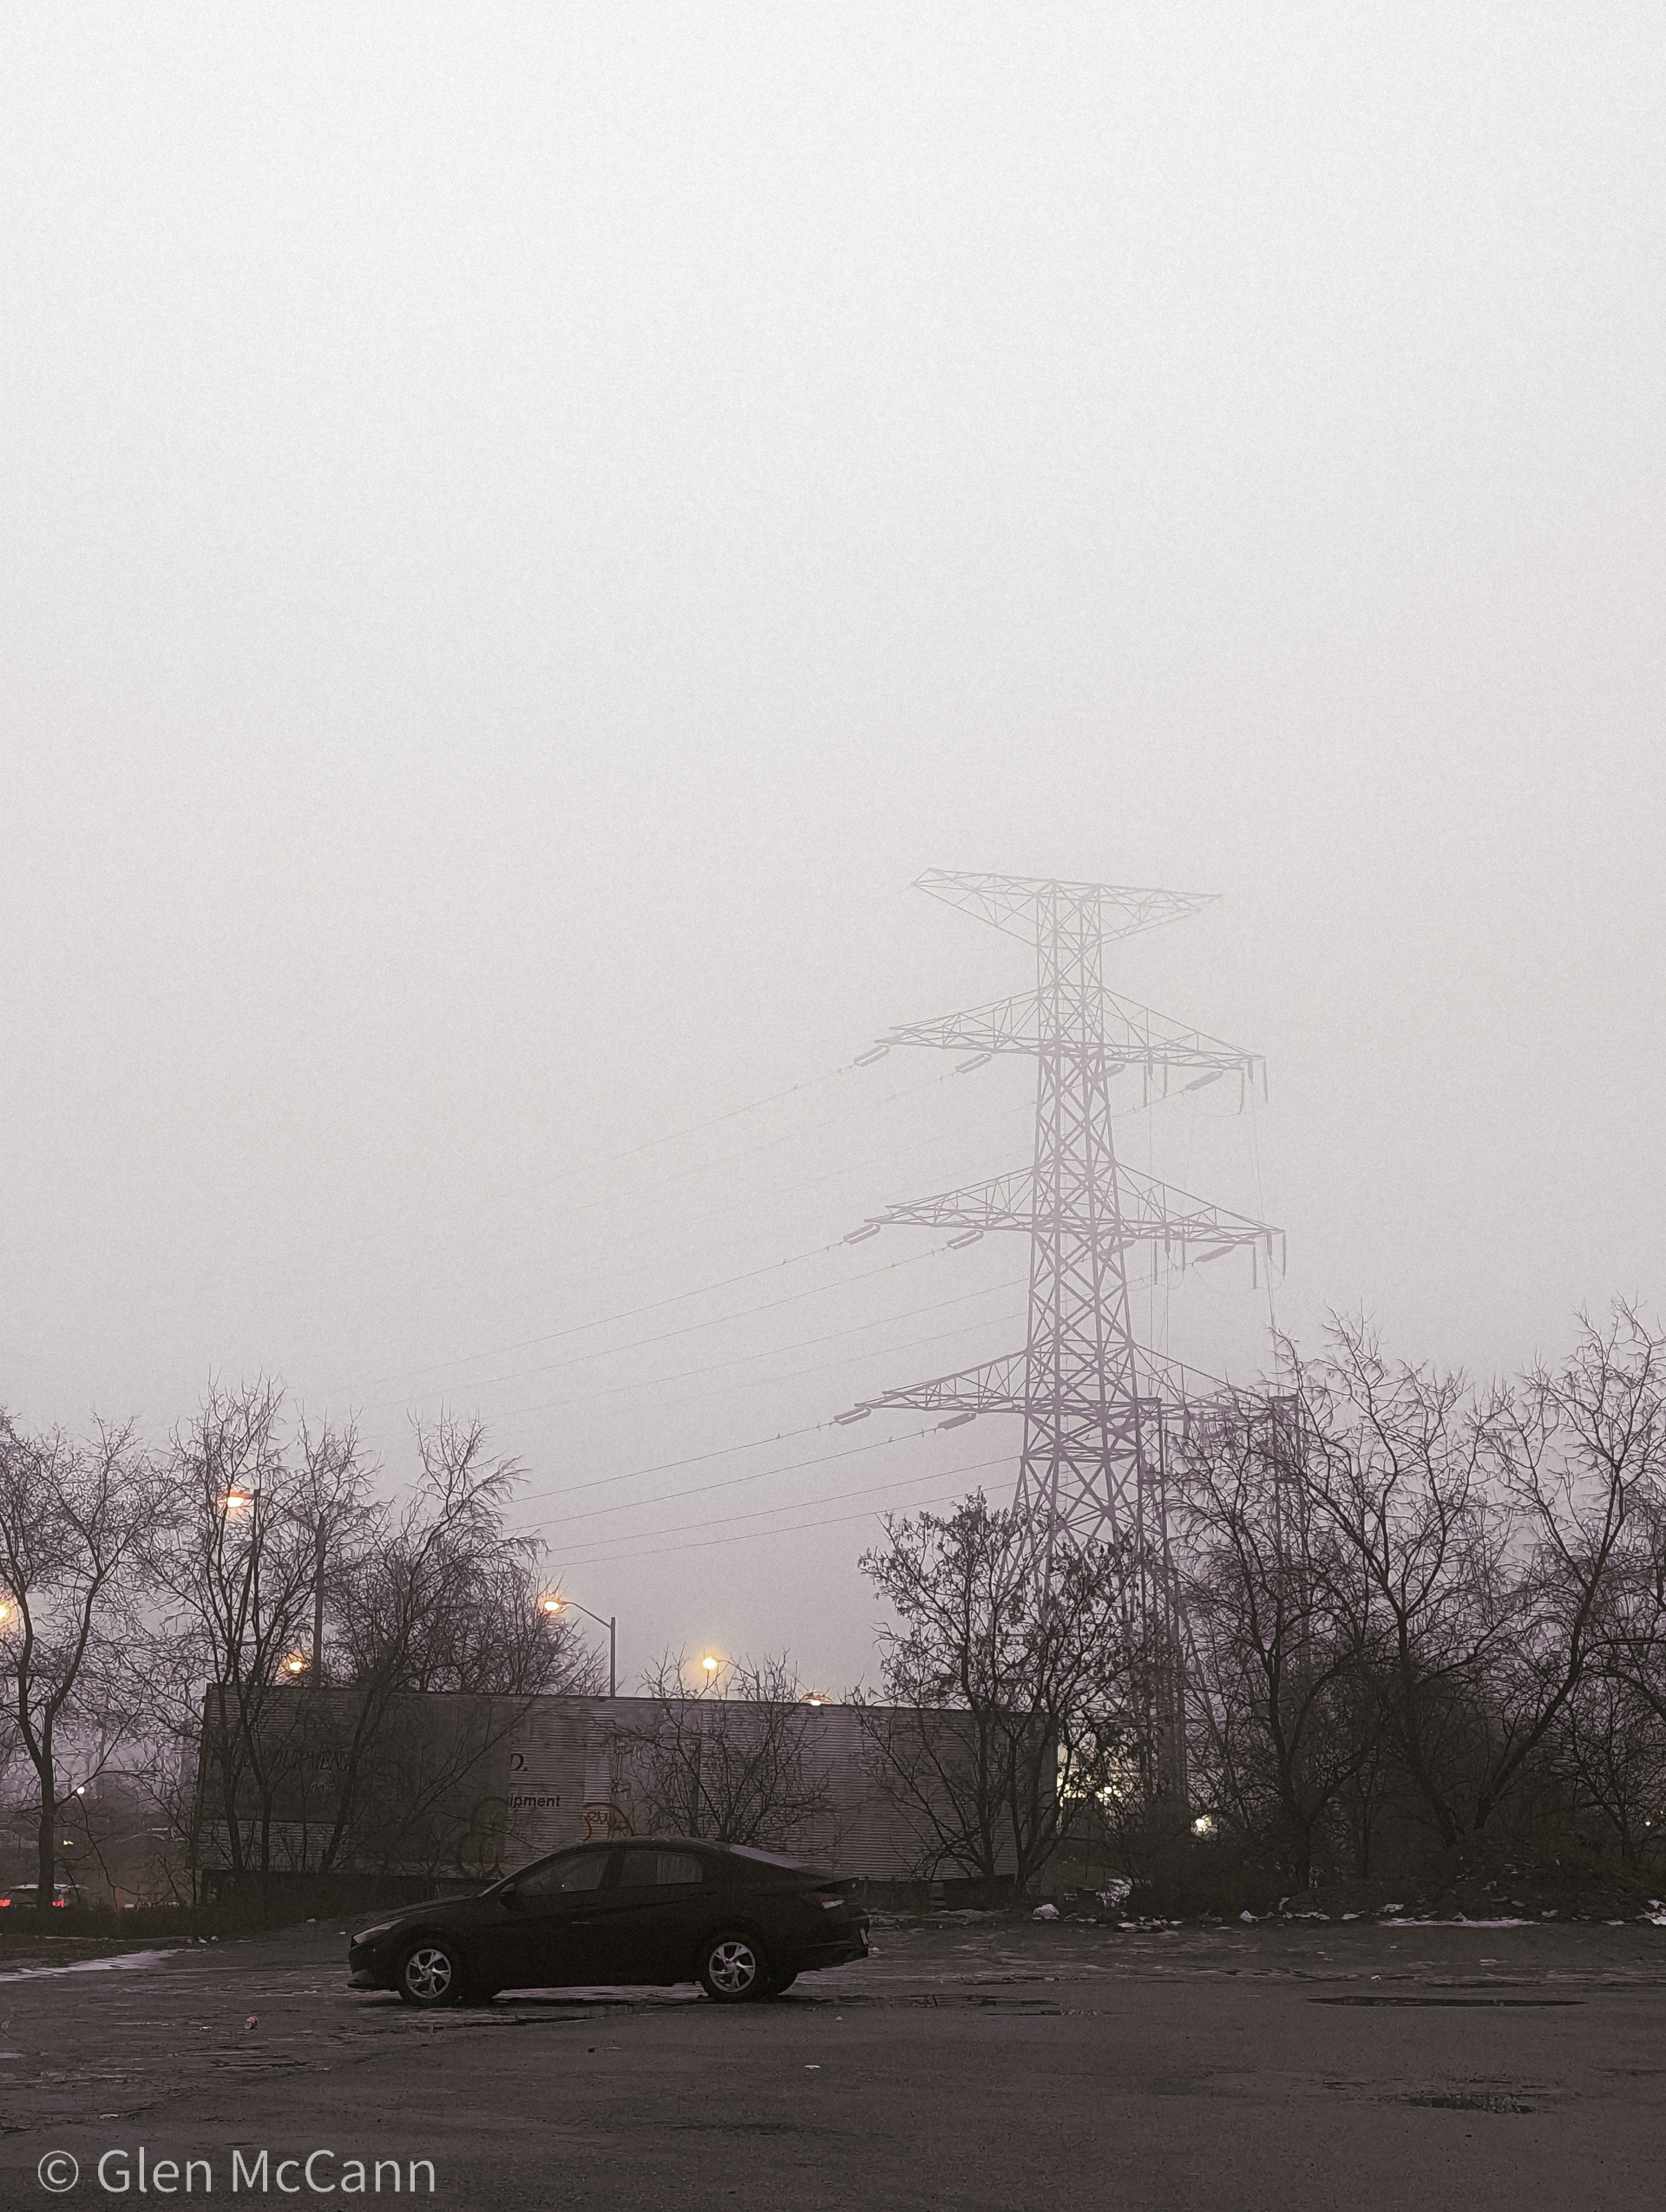 Photo of a car in a foggy parking lot with a radio tower in the background.